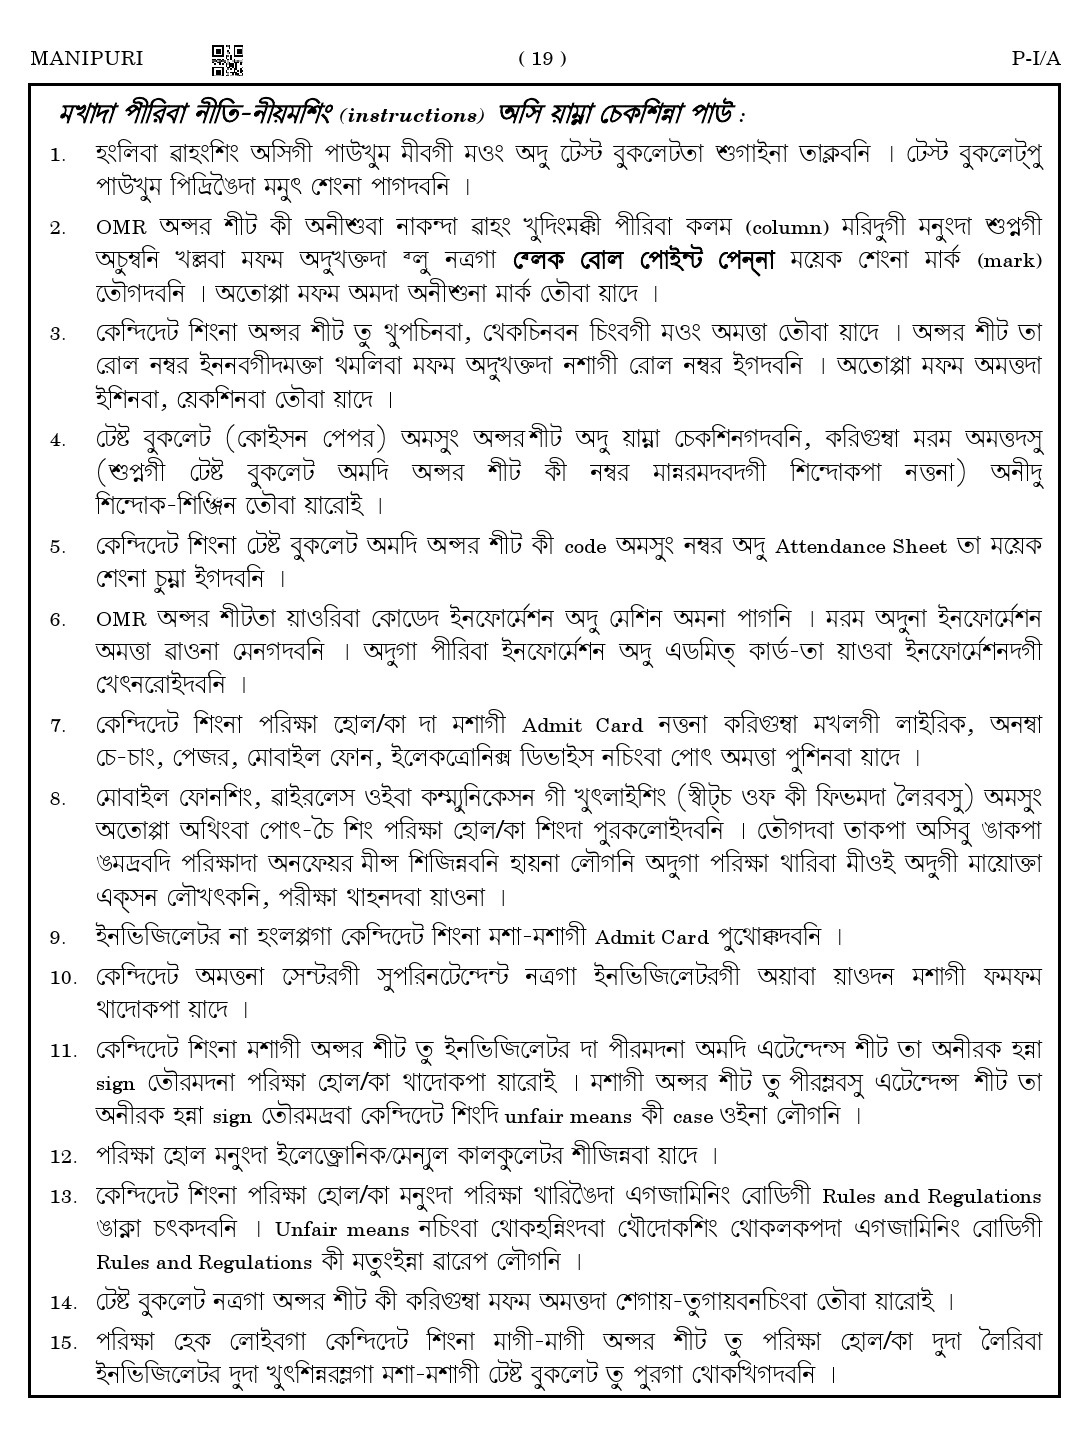 CTET August 2023 Manipuri Paper 1 Part IV and V 17